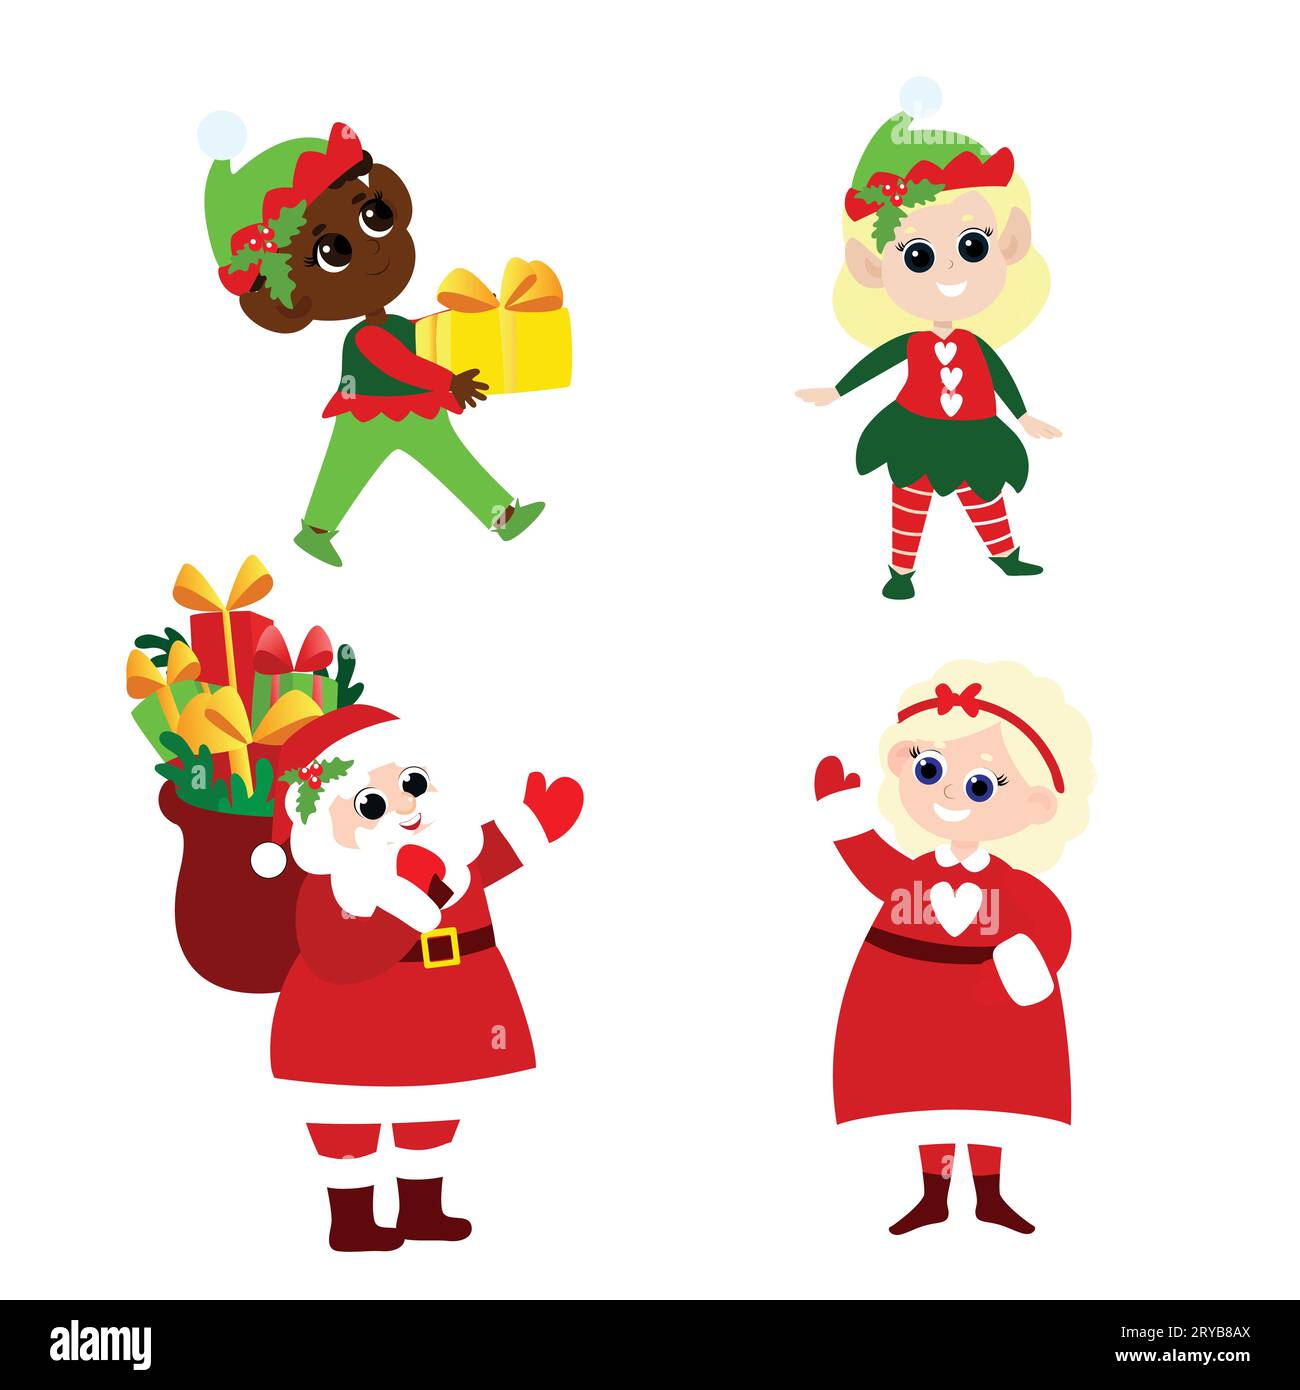 Set of Santa Claus, Mrs. Santa Claus, elves  in cartoon style isolated on white background. Cute and positive Christmas characters. Stock Vector